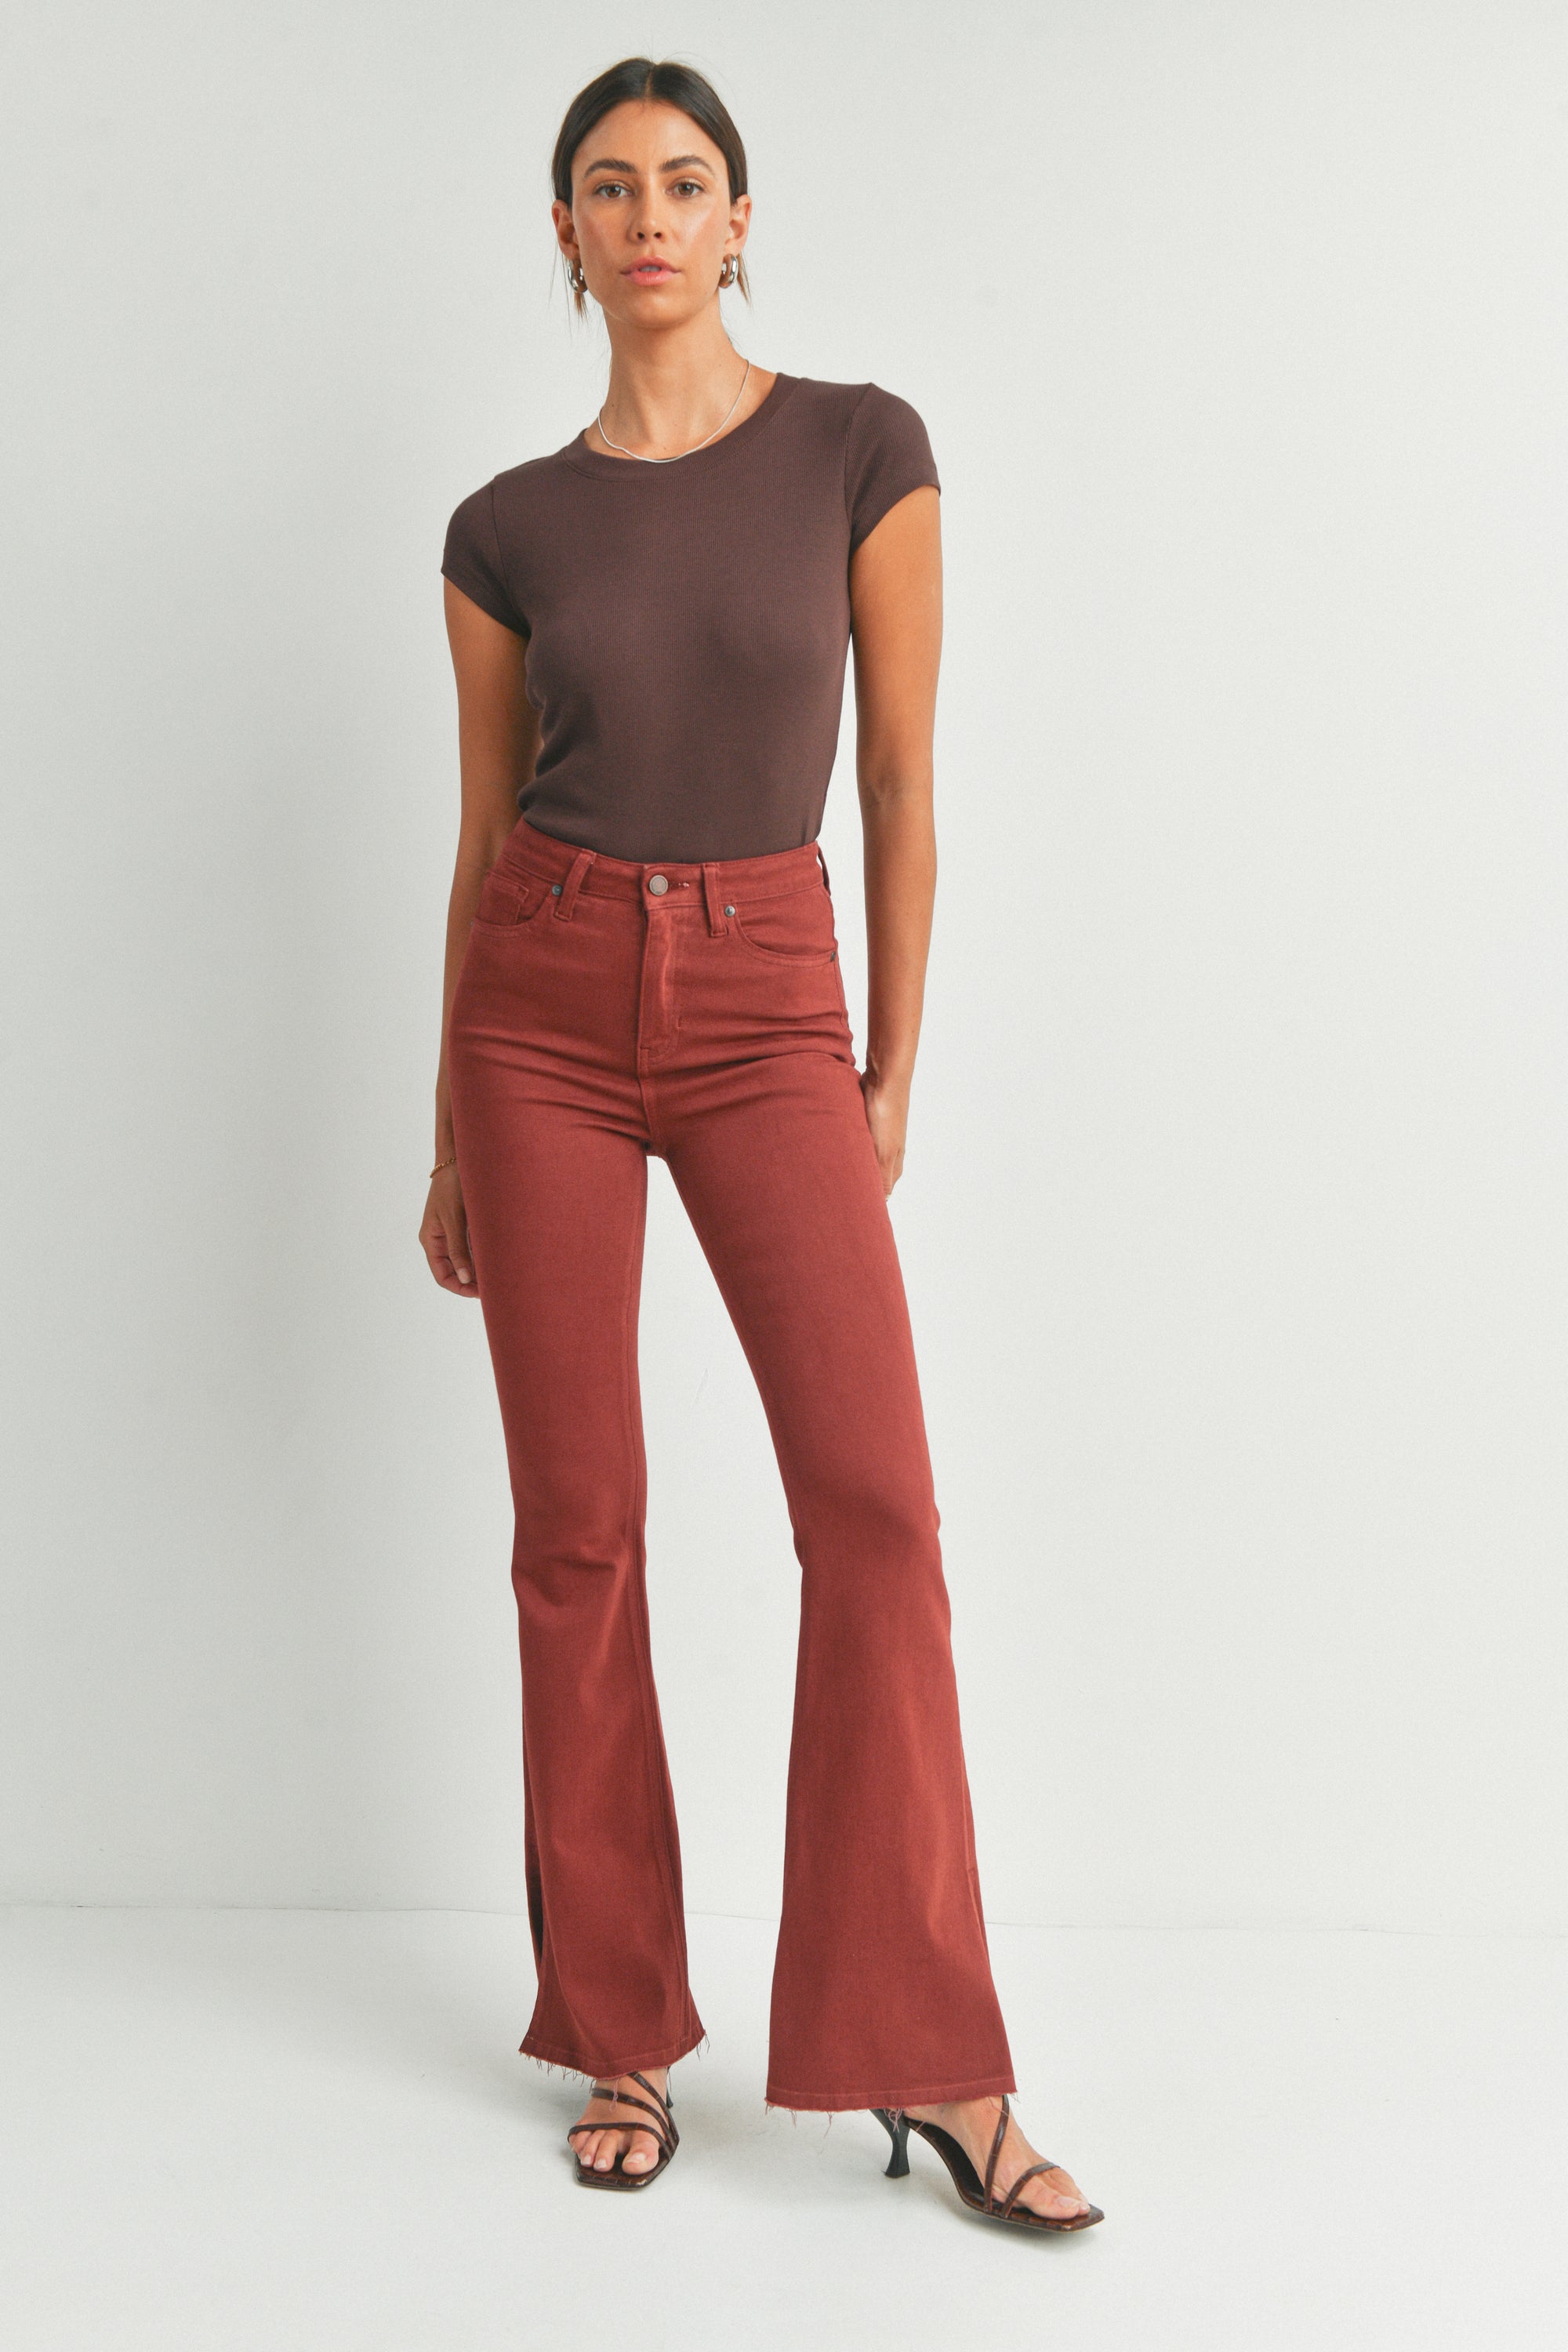 Just Black Denim | Red Flare Jeans for Women | Sweetest Stitch